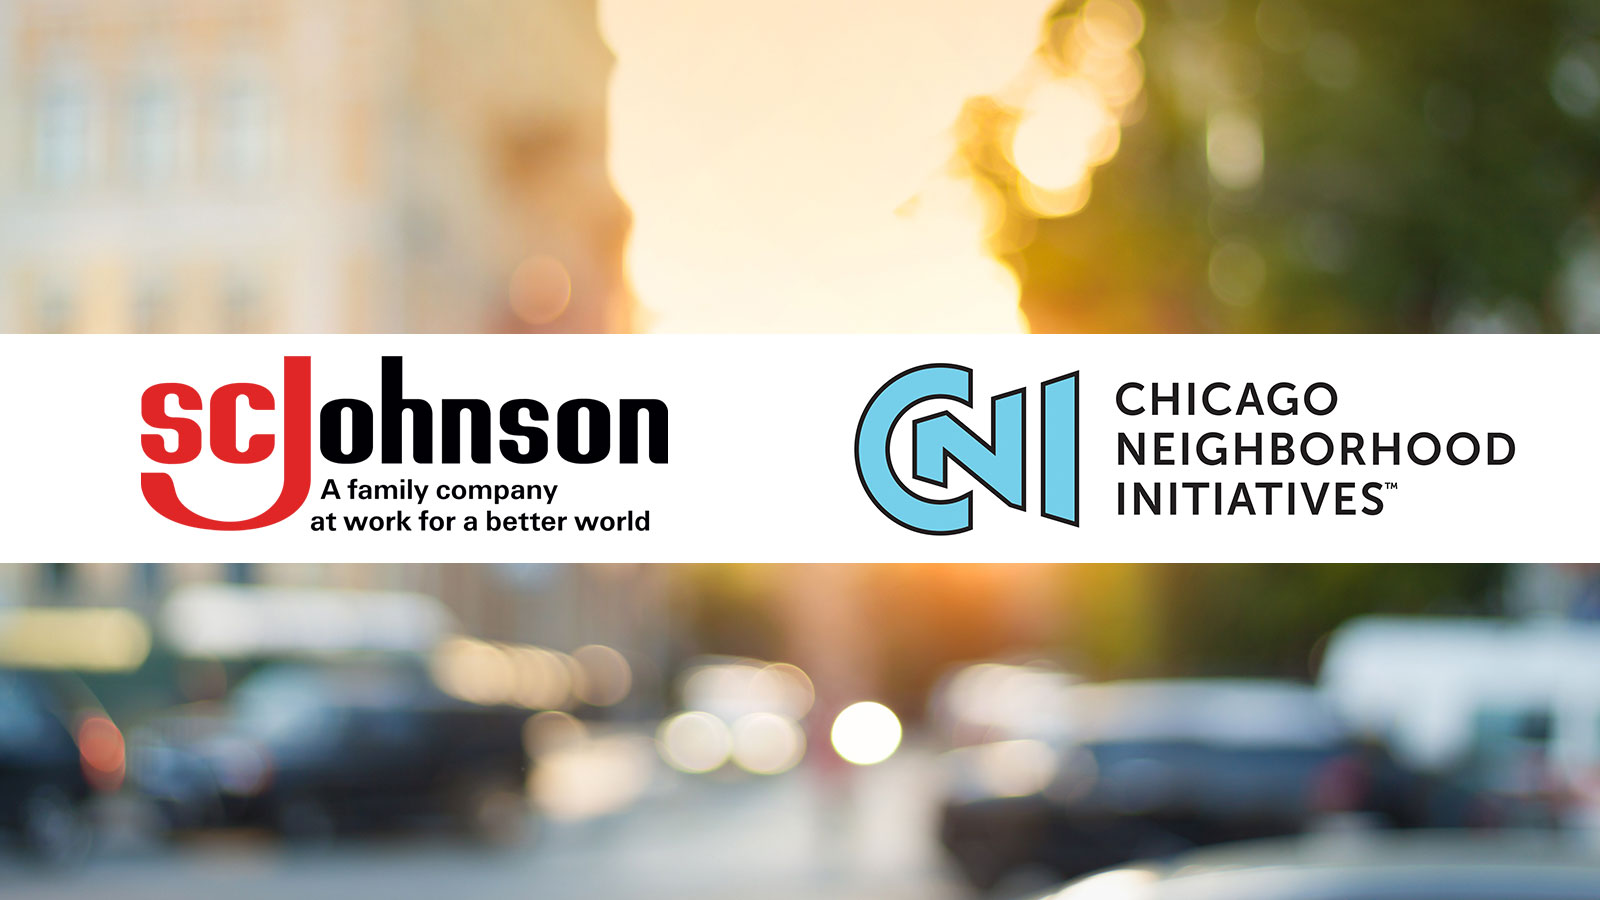 Chicago Neighborhood Initiatives Receives $200,000 Grant from  SC Johnson to Support Minority- and Women-Owned Small Businesses  